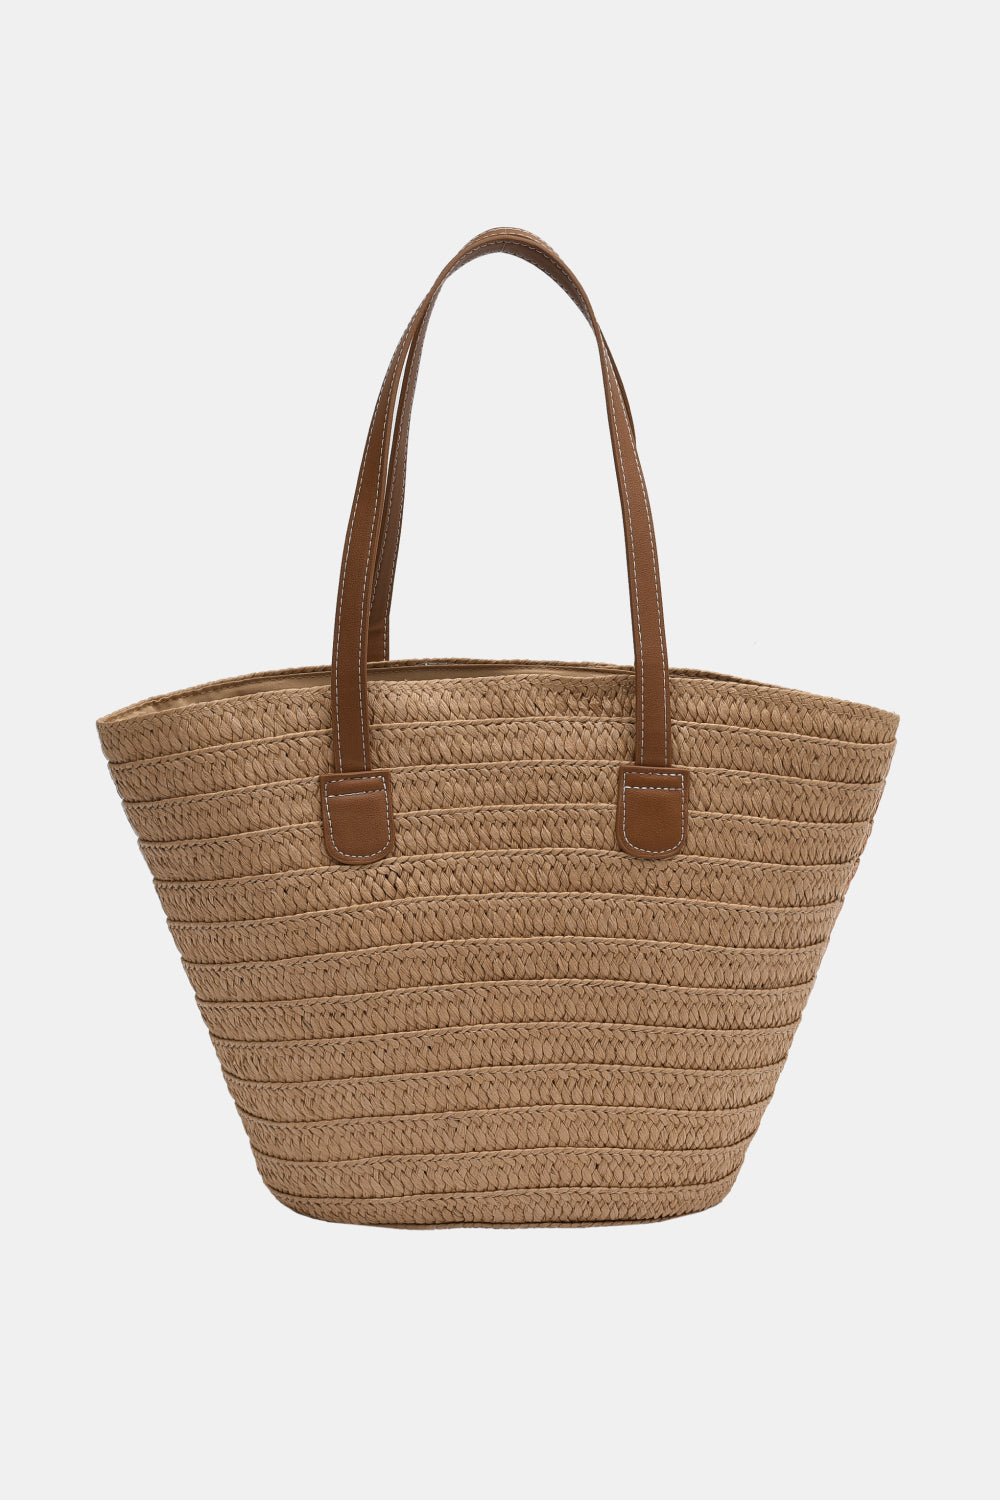 Tropical Beach Vegan Leather Straw Tote Bag | Hypoallergenic - Allergy Friendly - Naturally Free